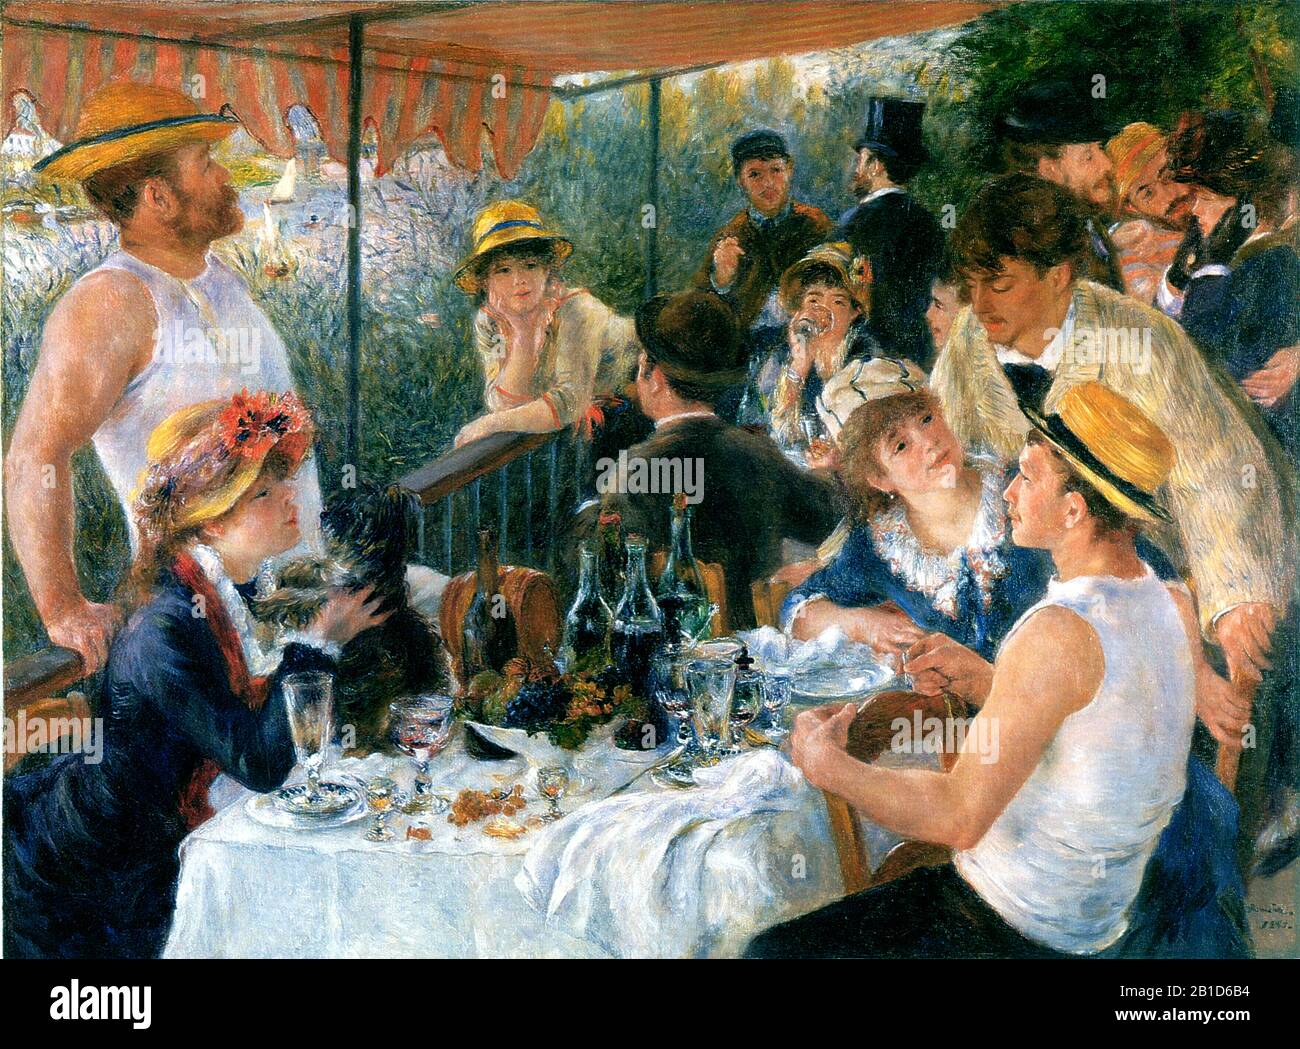 Luncheon of the Boating Party (1881) - 19th Century Painting by Pierre-Auguste Renoir - Very high resolution and quality image Stock Photo